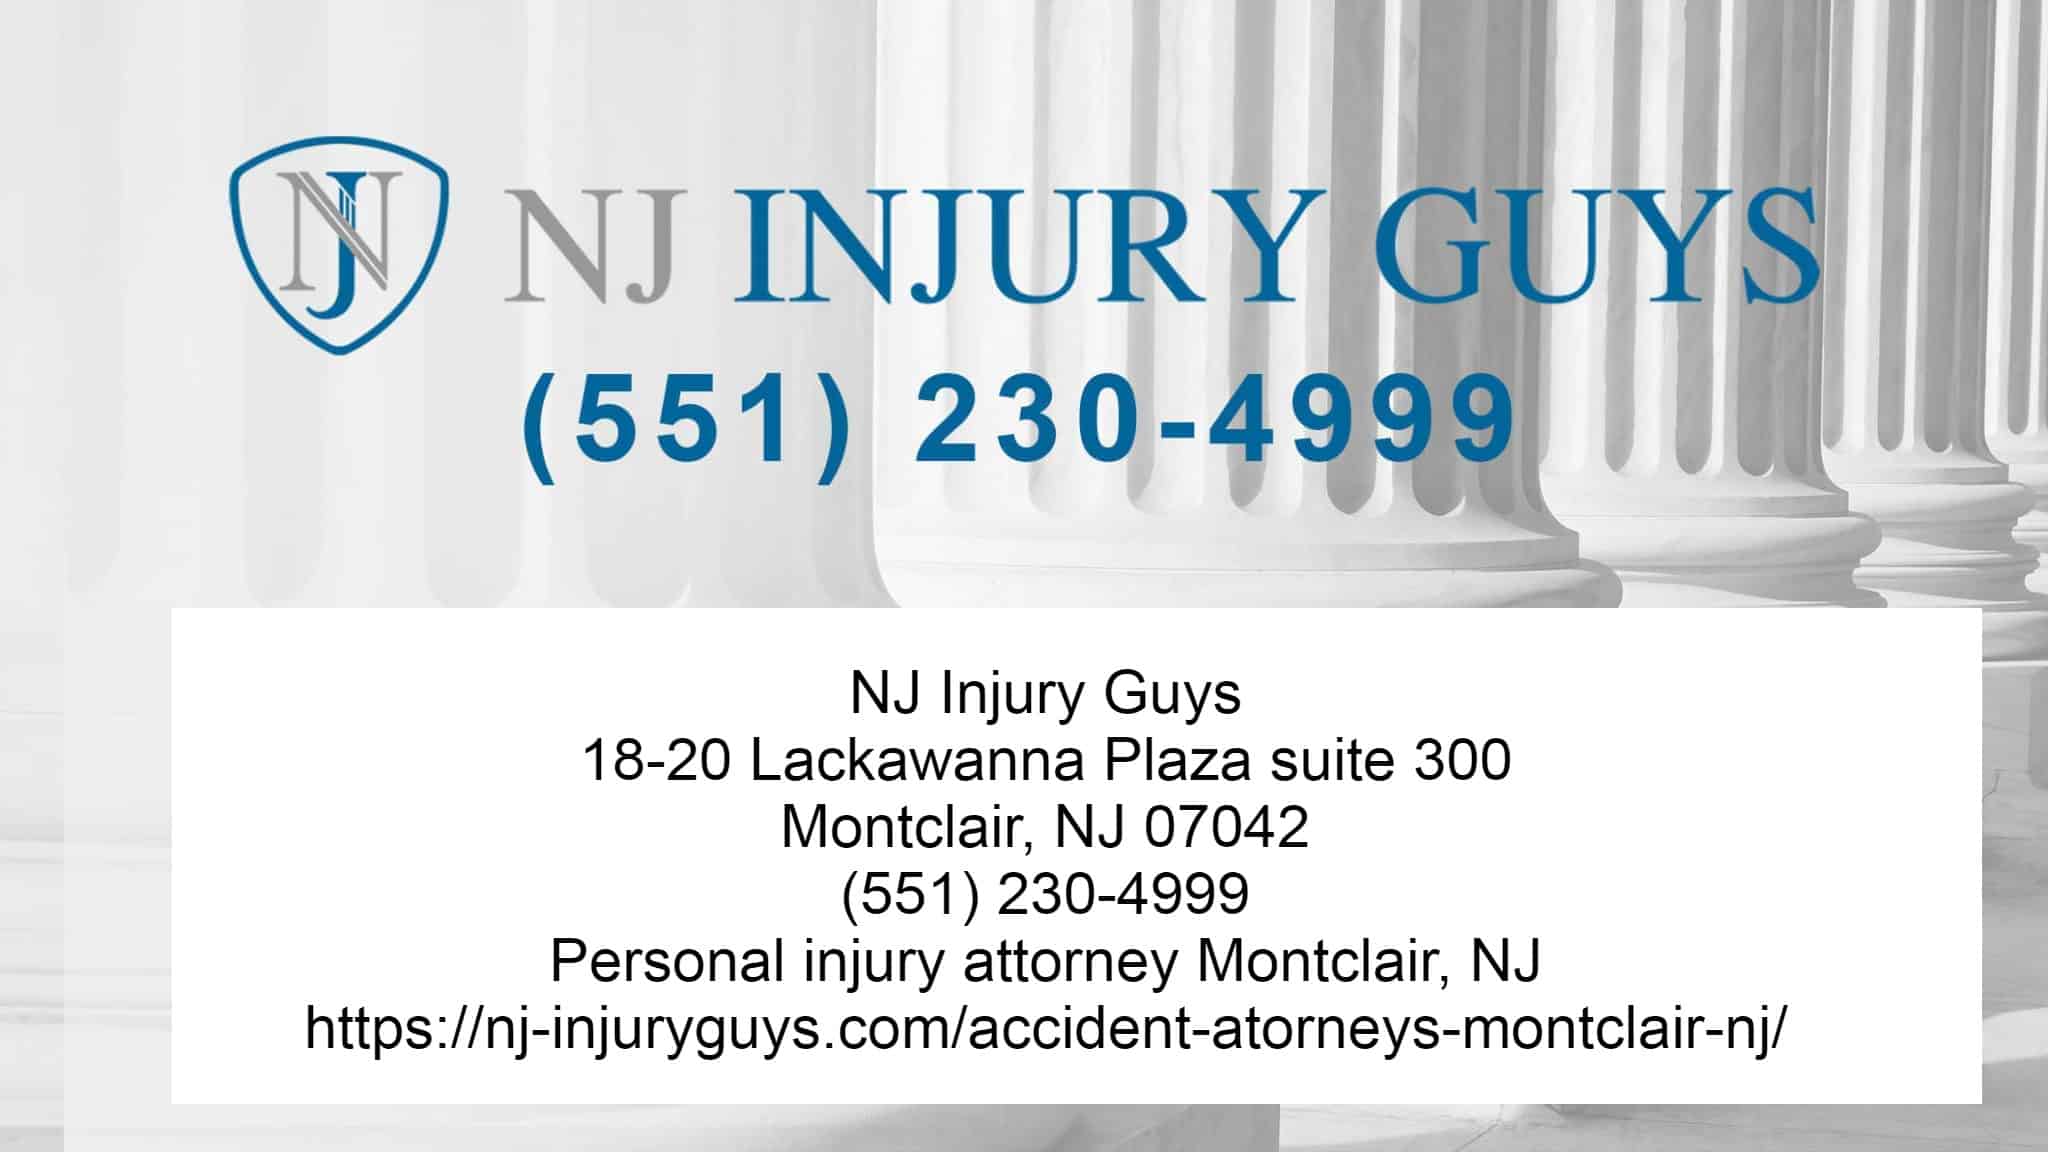 Montclair Medical Malpractice Law Firm For Birth Injury Claims | 24-Hour Hotline